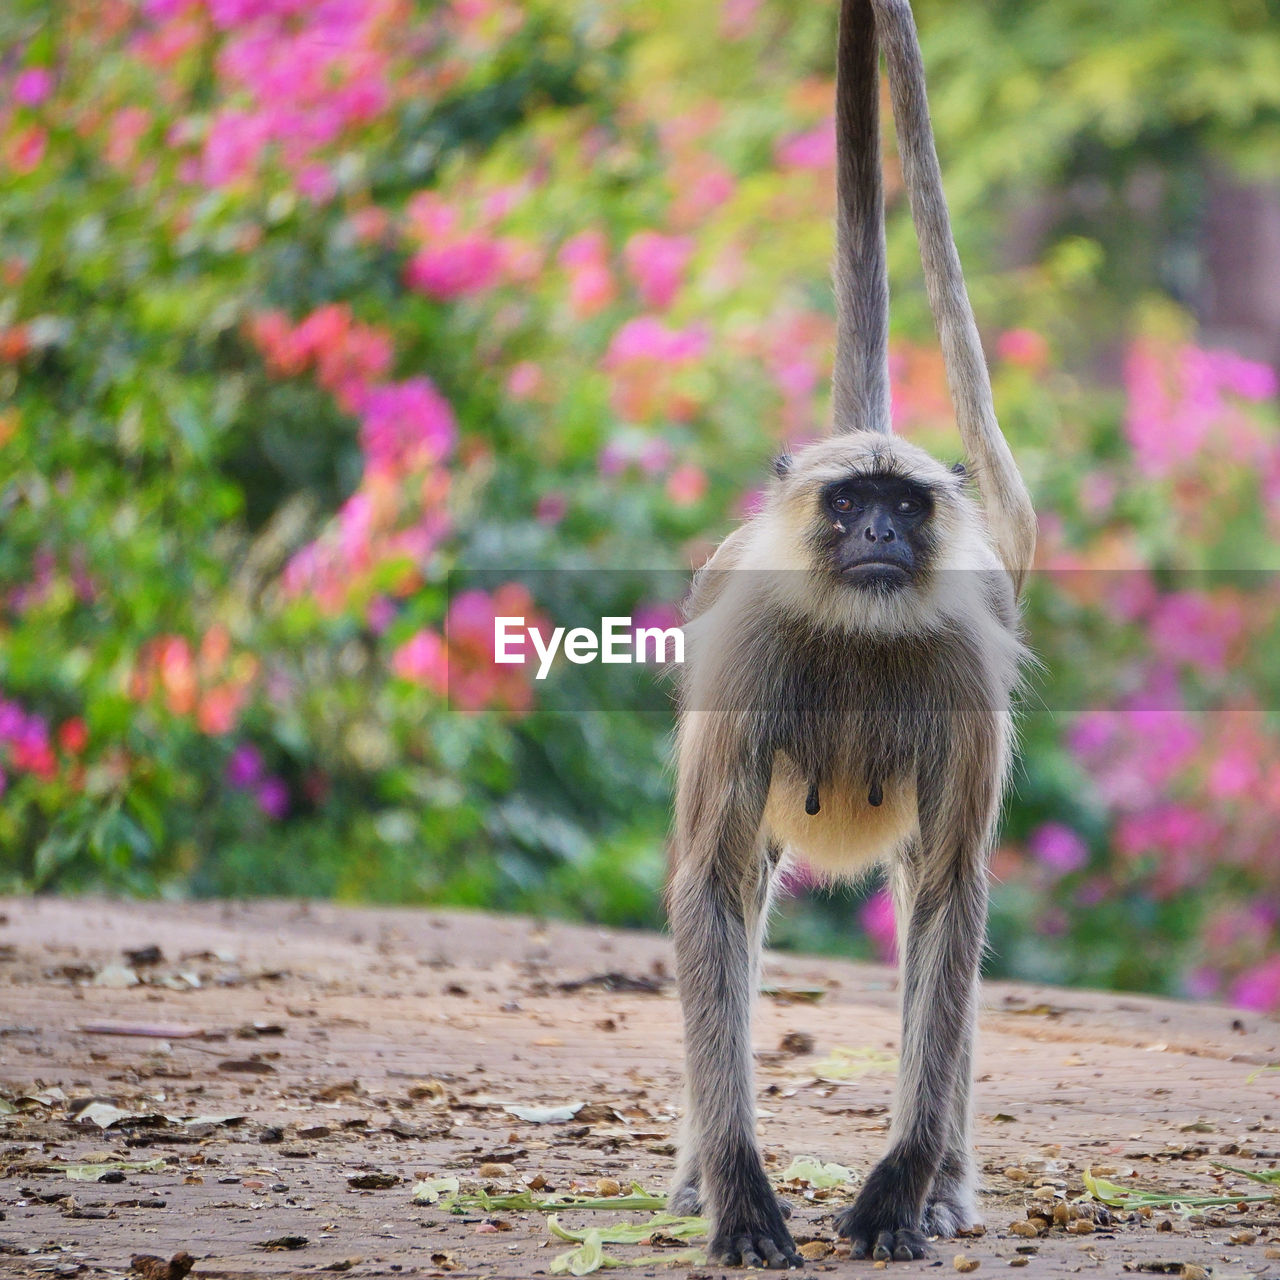 A wild monkey is standing in a park in jodhpur, with blooming boghenvilia in the background